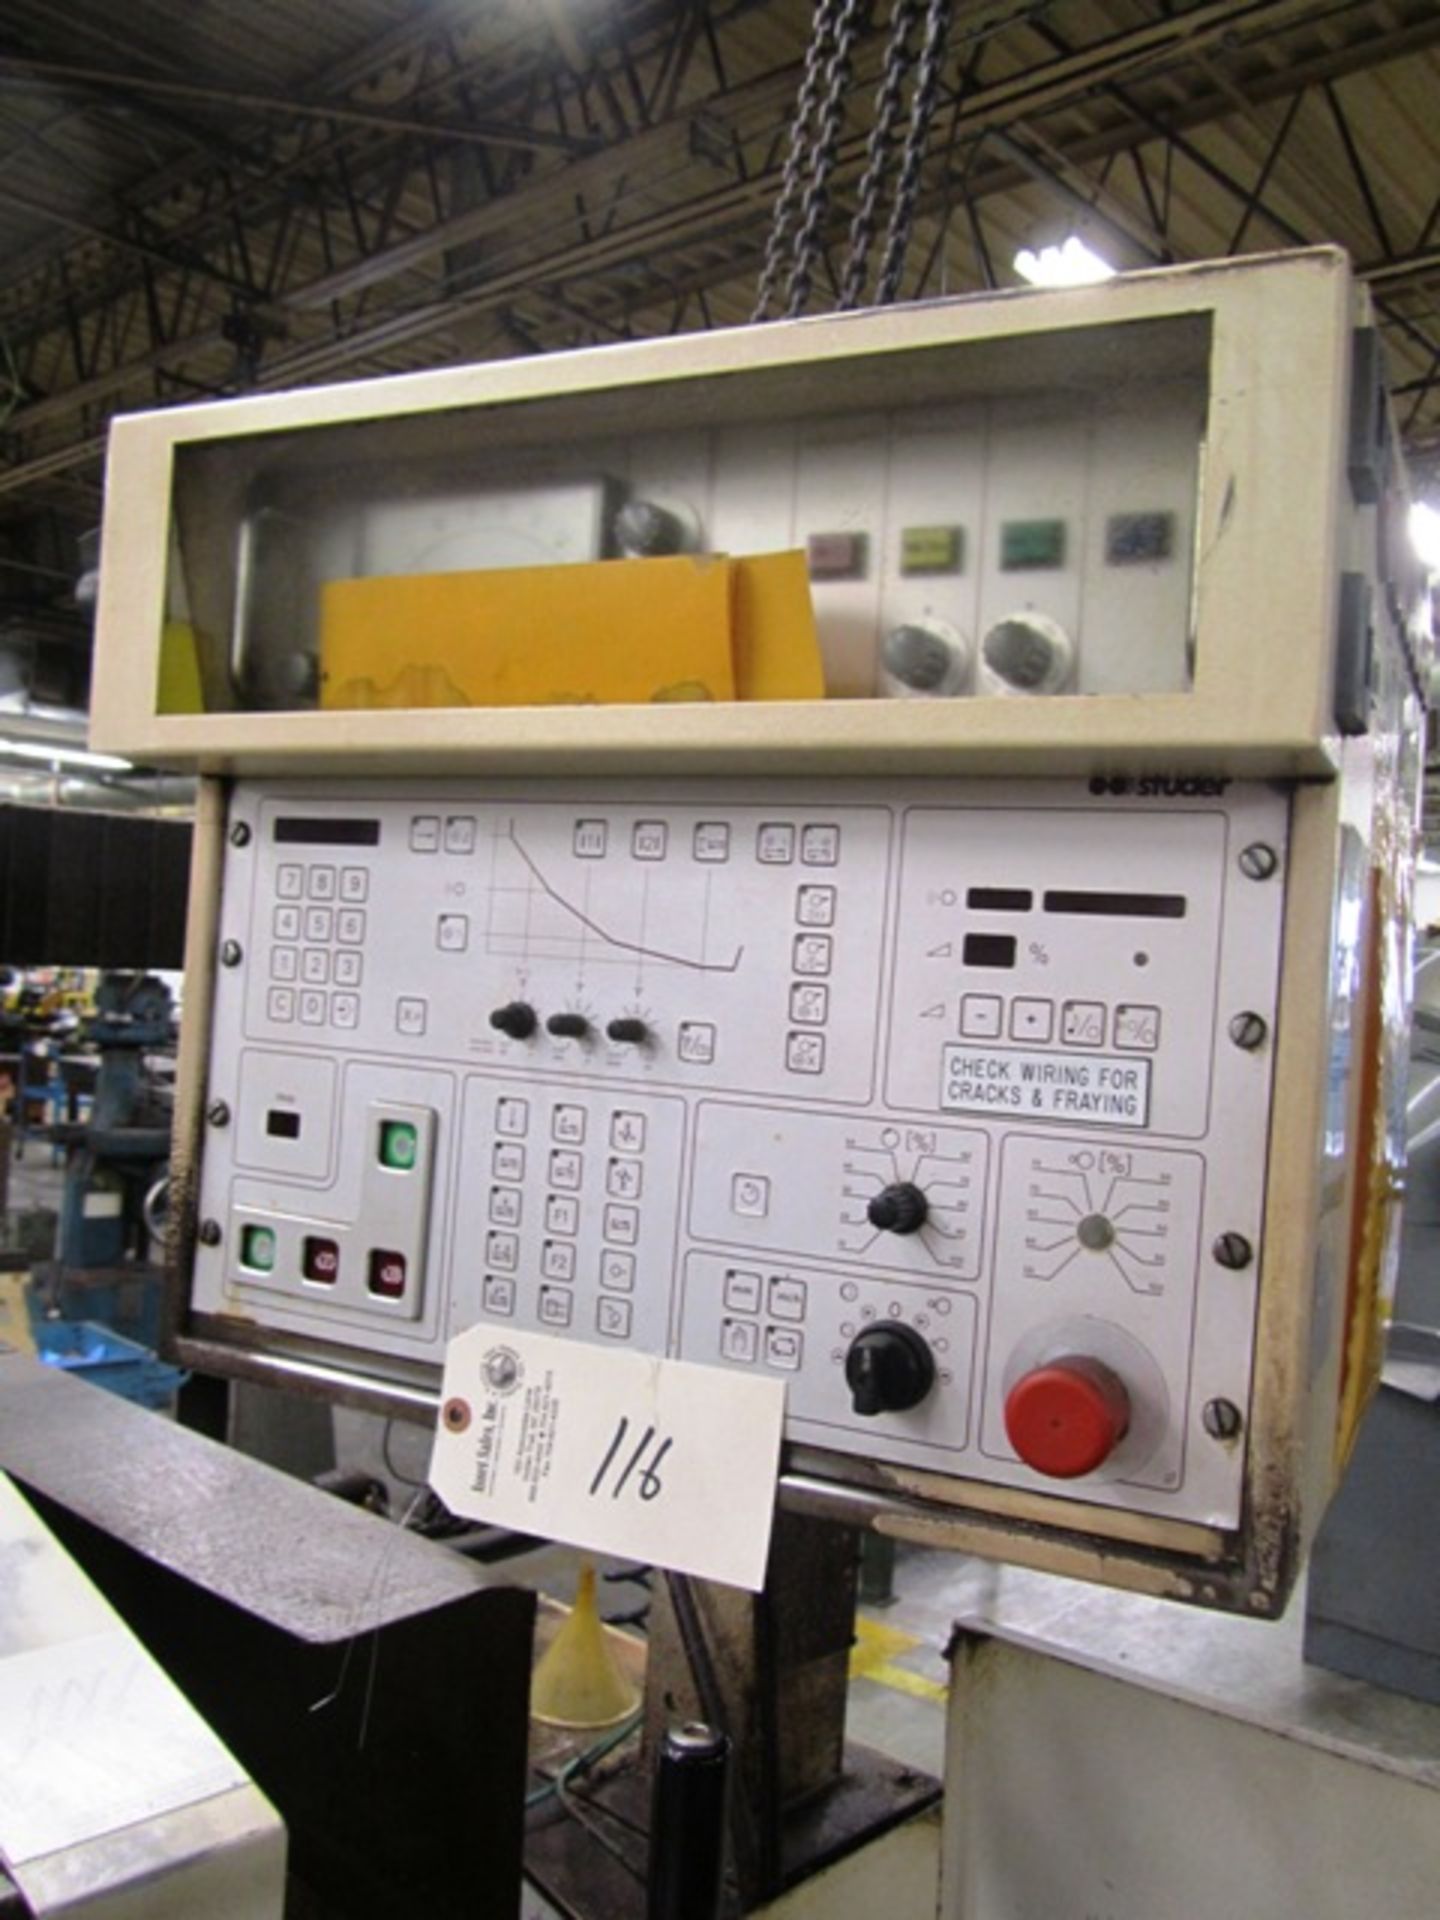 Studer S40-2 14'' x 36'' CNC Cylindrical Grinder with Controls, Coolant, sn:4173-24 - Image 2 of 3